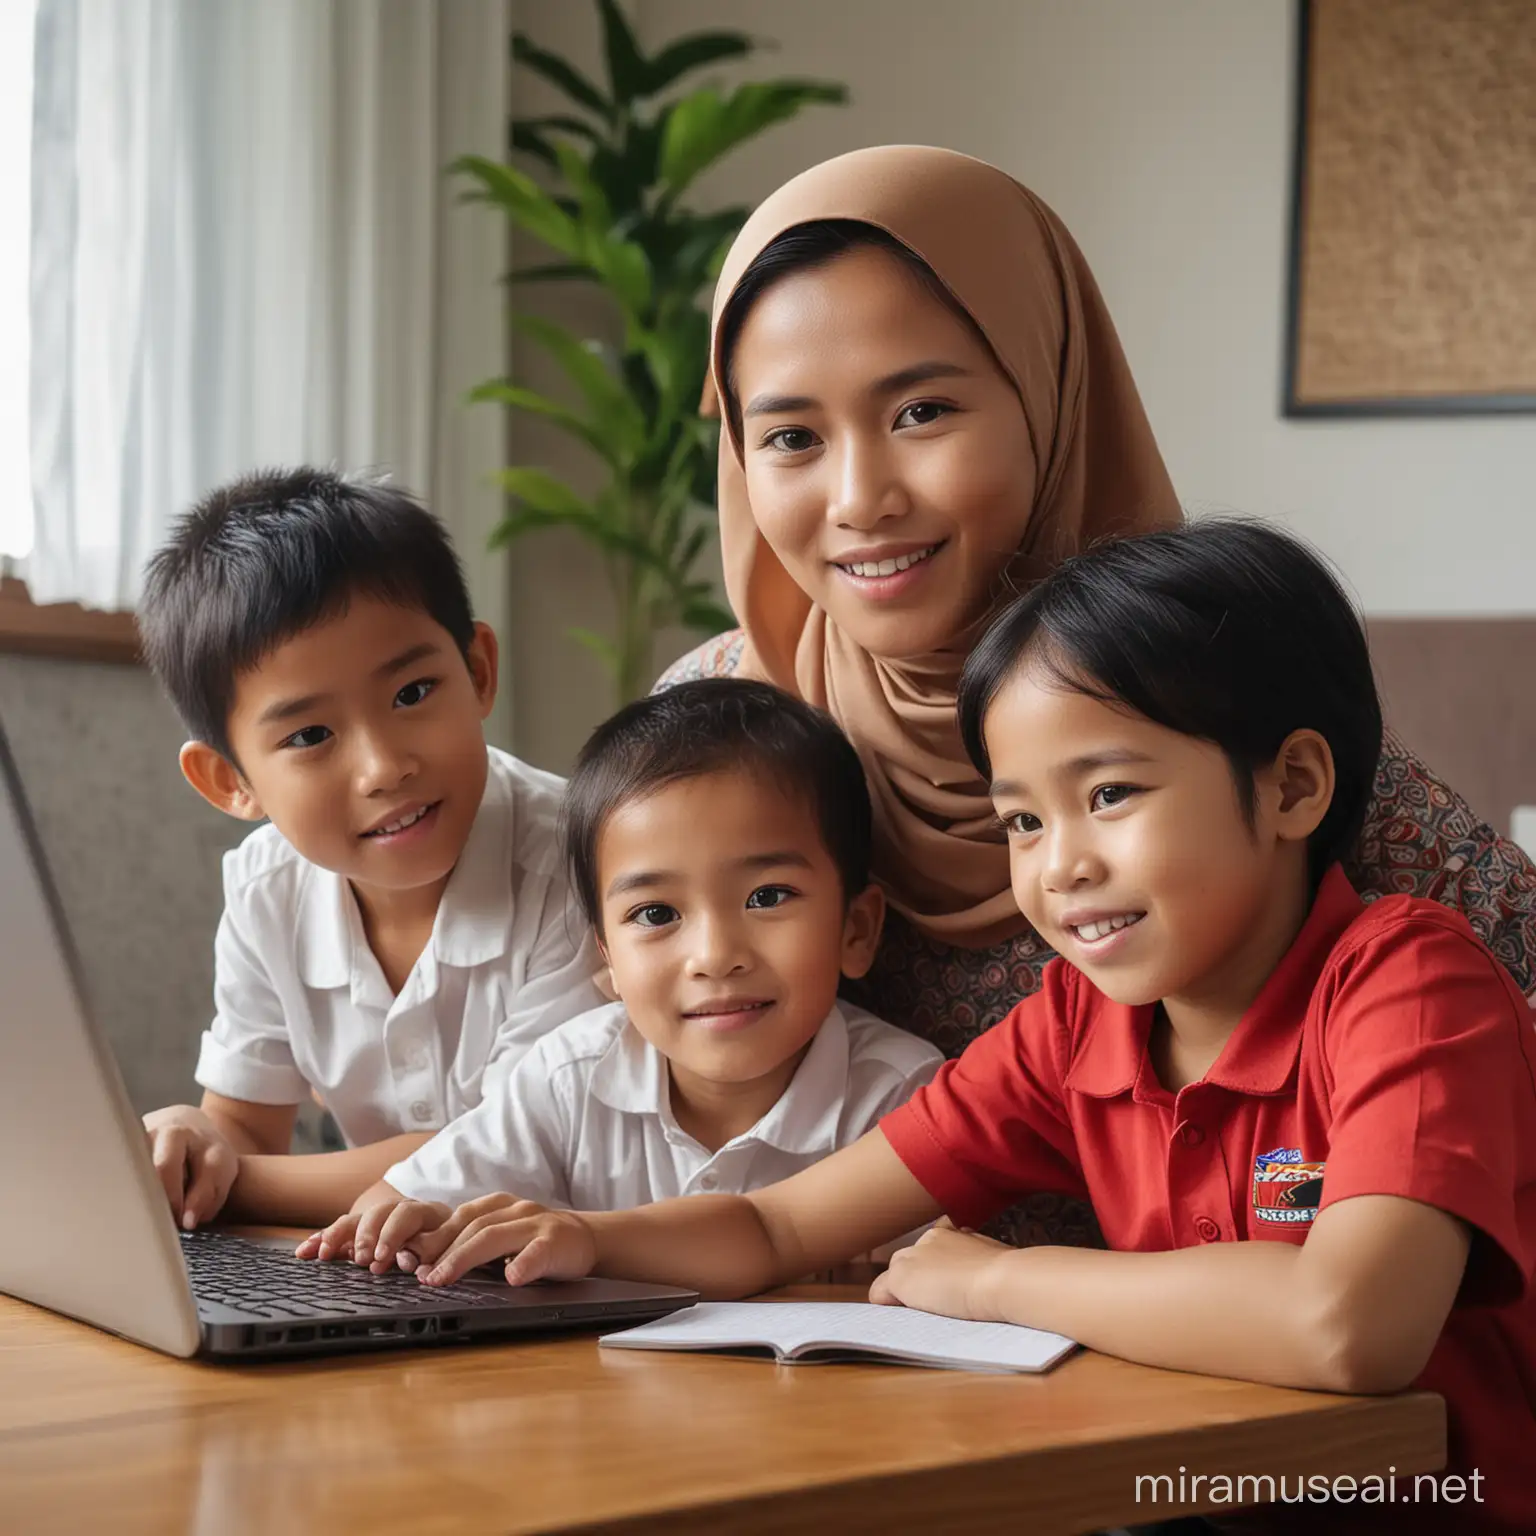 Indonesian Mother and Children Juggling Online Business and Study in Vibrant Living Room Setting